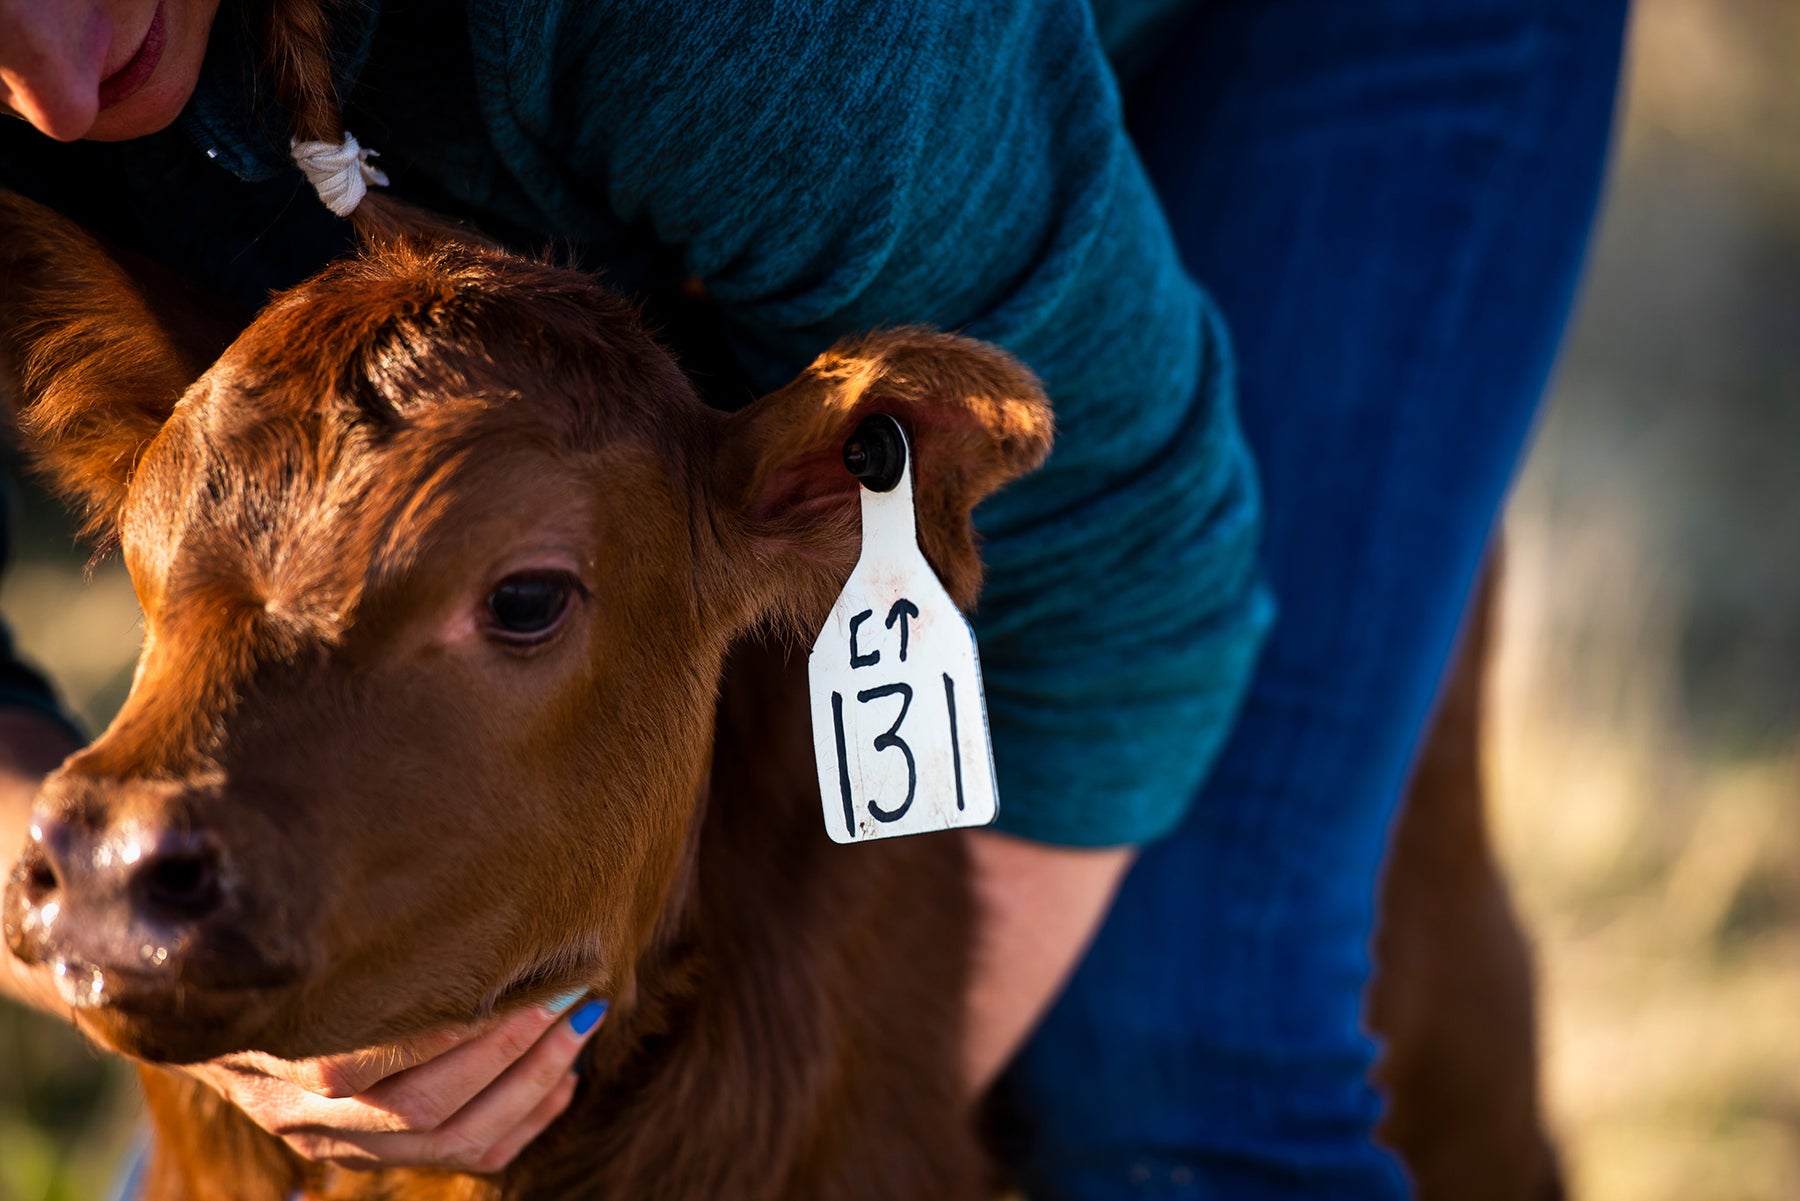 Red Angus calf with a white and black ear tag that reads 131